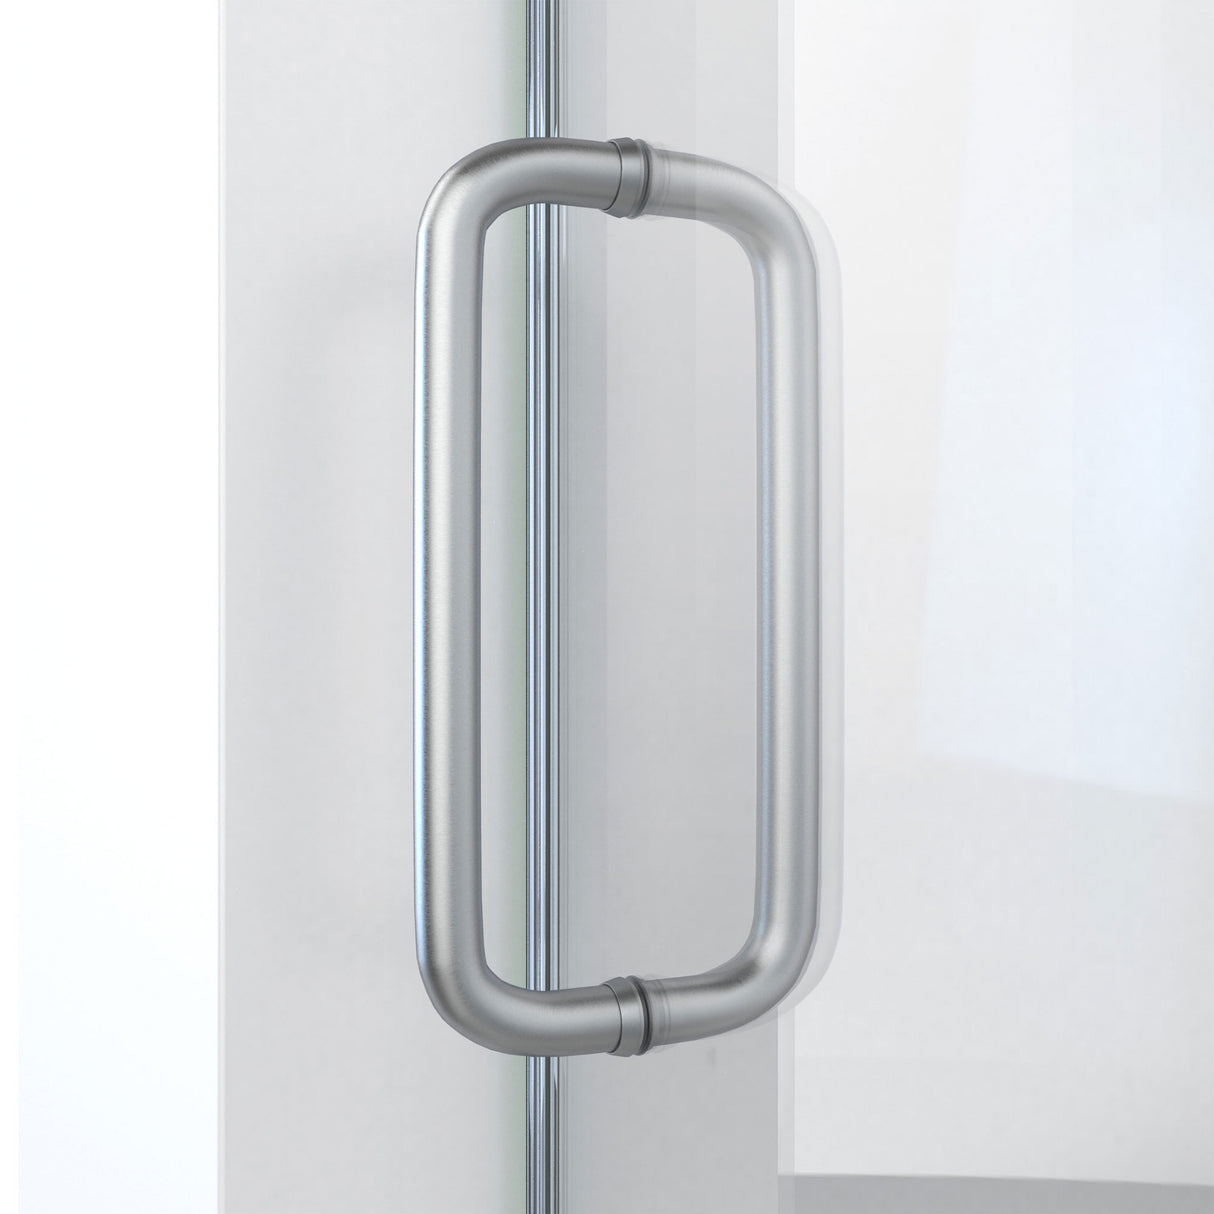 DreamLine Enigma-CXO 56-60 in. W x 76 in. H Fully Frameless Sliding Shower Door in Brushed Stainless Steel with Towel Bar